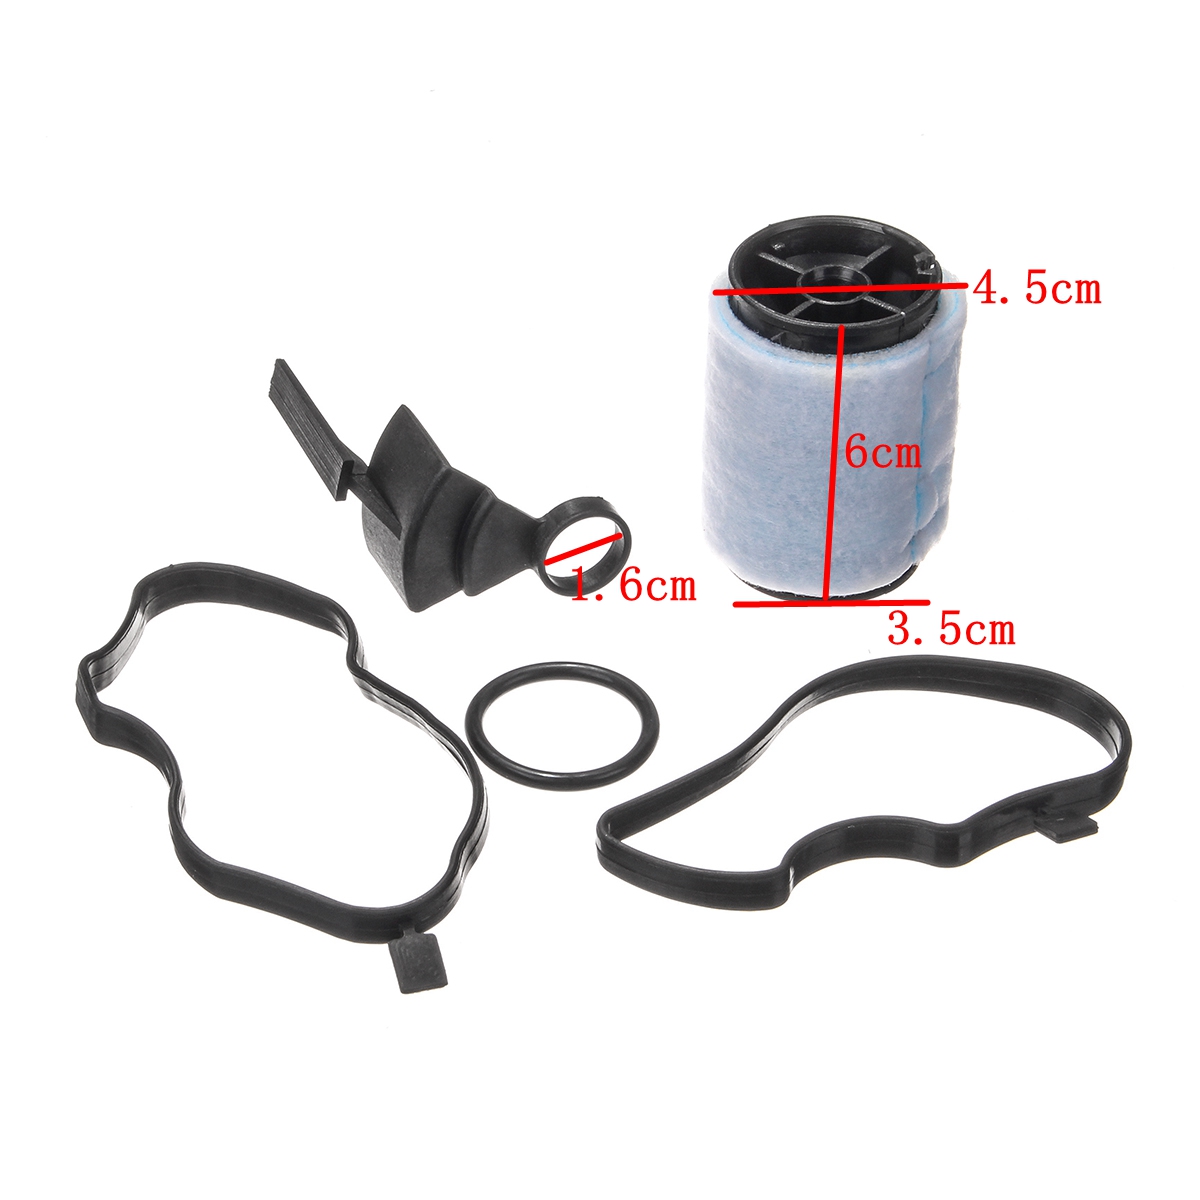 For BMW E46 E53 E60 E87 E90 E83 E91 E39 E61 X3 X5 1998-2012 #11127793164 Crankcase Oil Breather Separator Filter With Gaskets